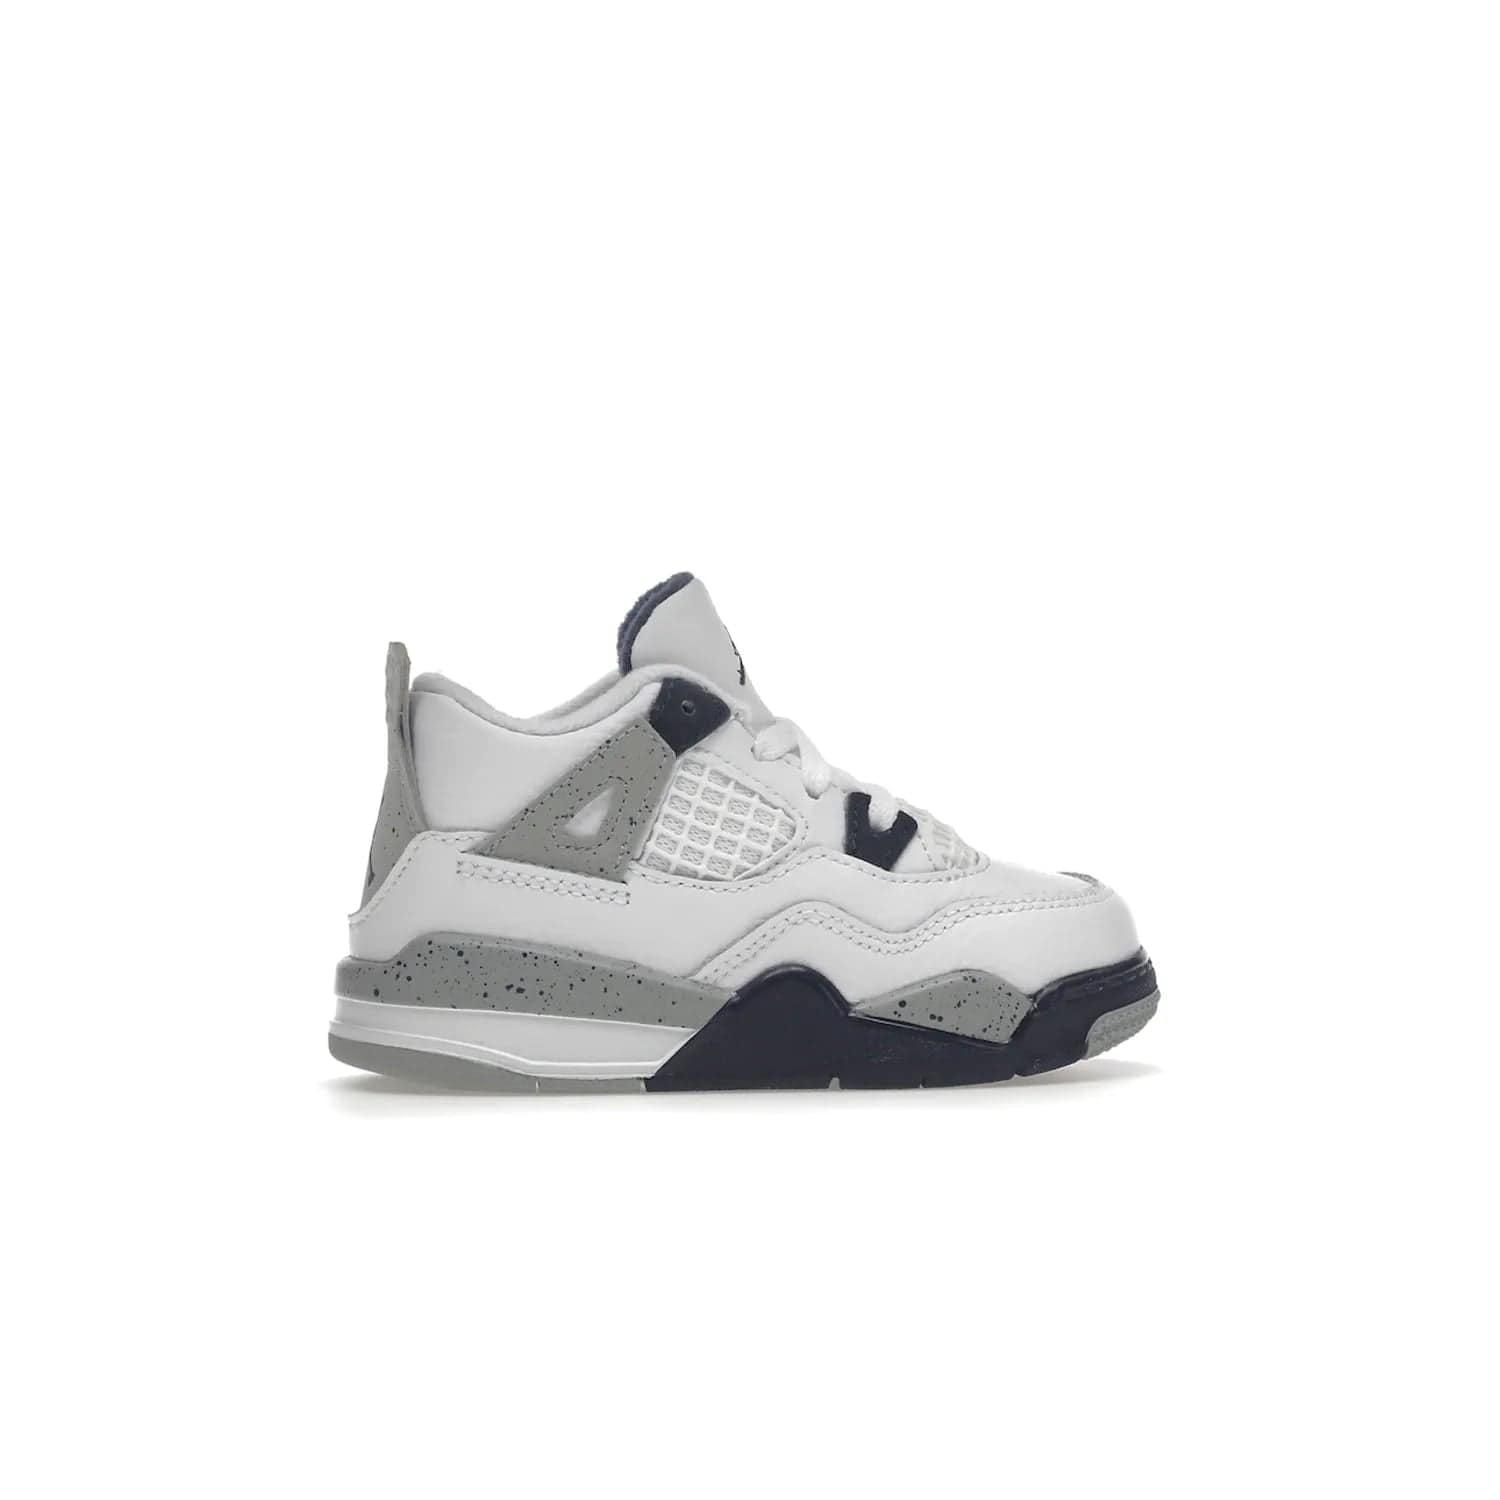 Jordan 4 Retro Midnight Navy (TD) - Image 36 - Only at www.BallersClubKickz.com - Introducing the Jordan 4 Retro Midnight Navy (TD) for kids. White leather upper with navy and grey accents plus fire red detailing. Perfect for everyday wear. Get yours before they sell out.